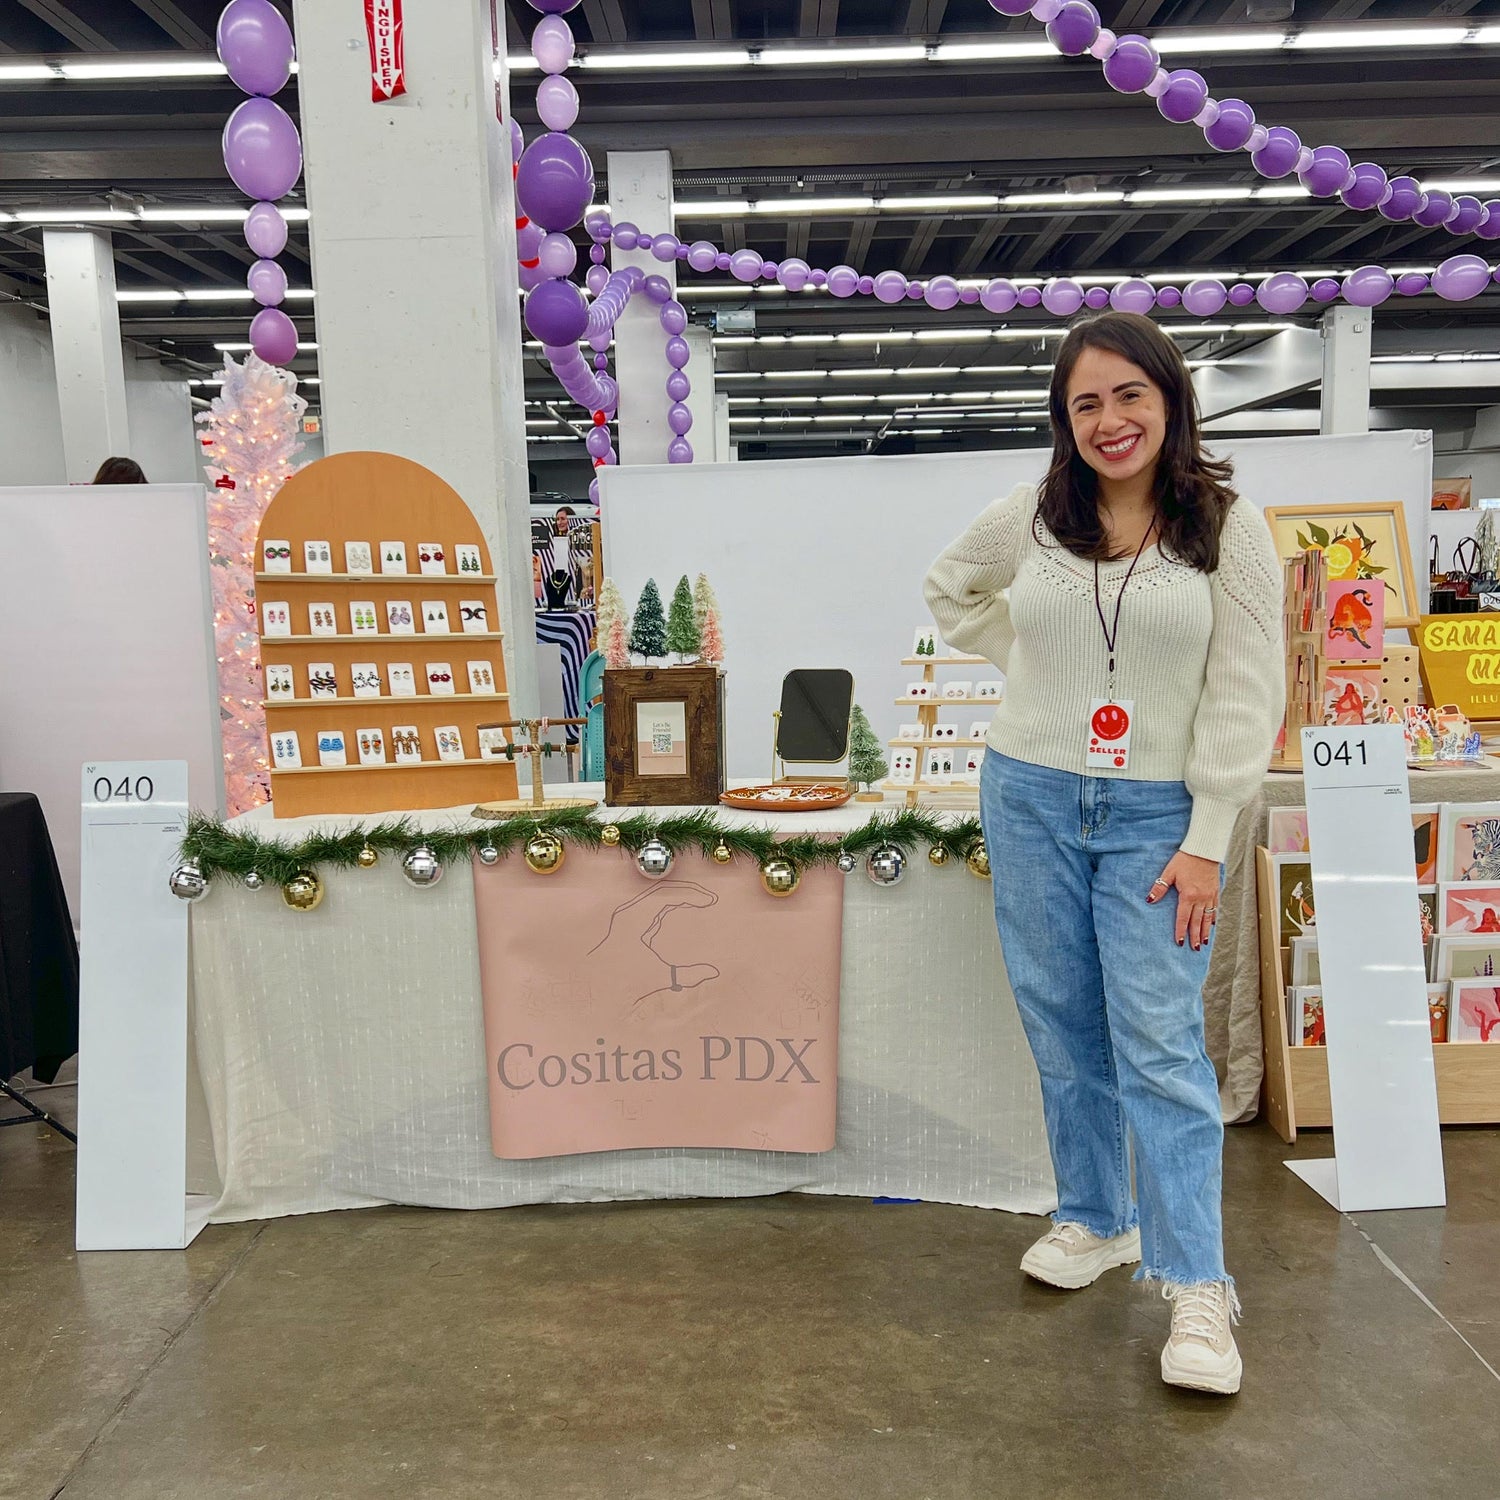 Lesly, Cositas PDX owner, standing at her market booth